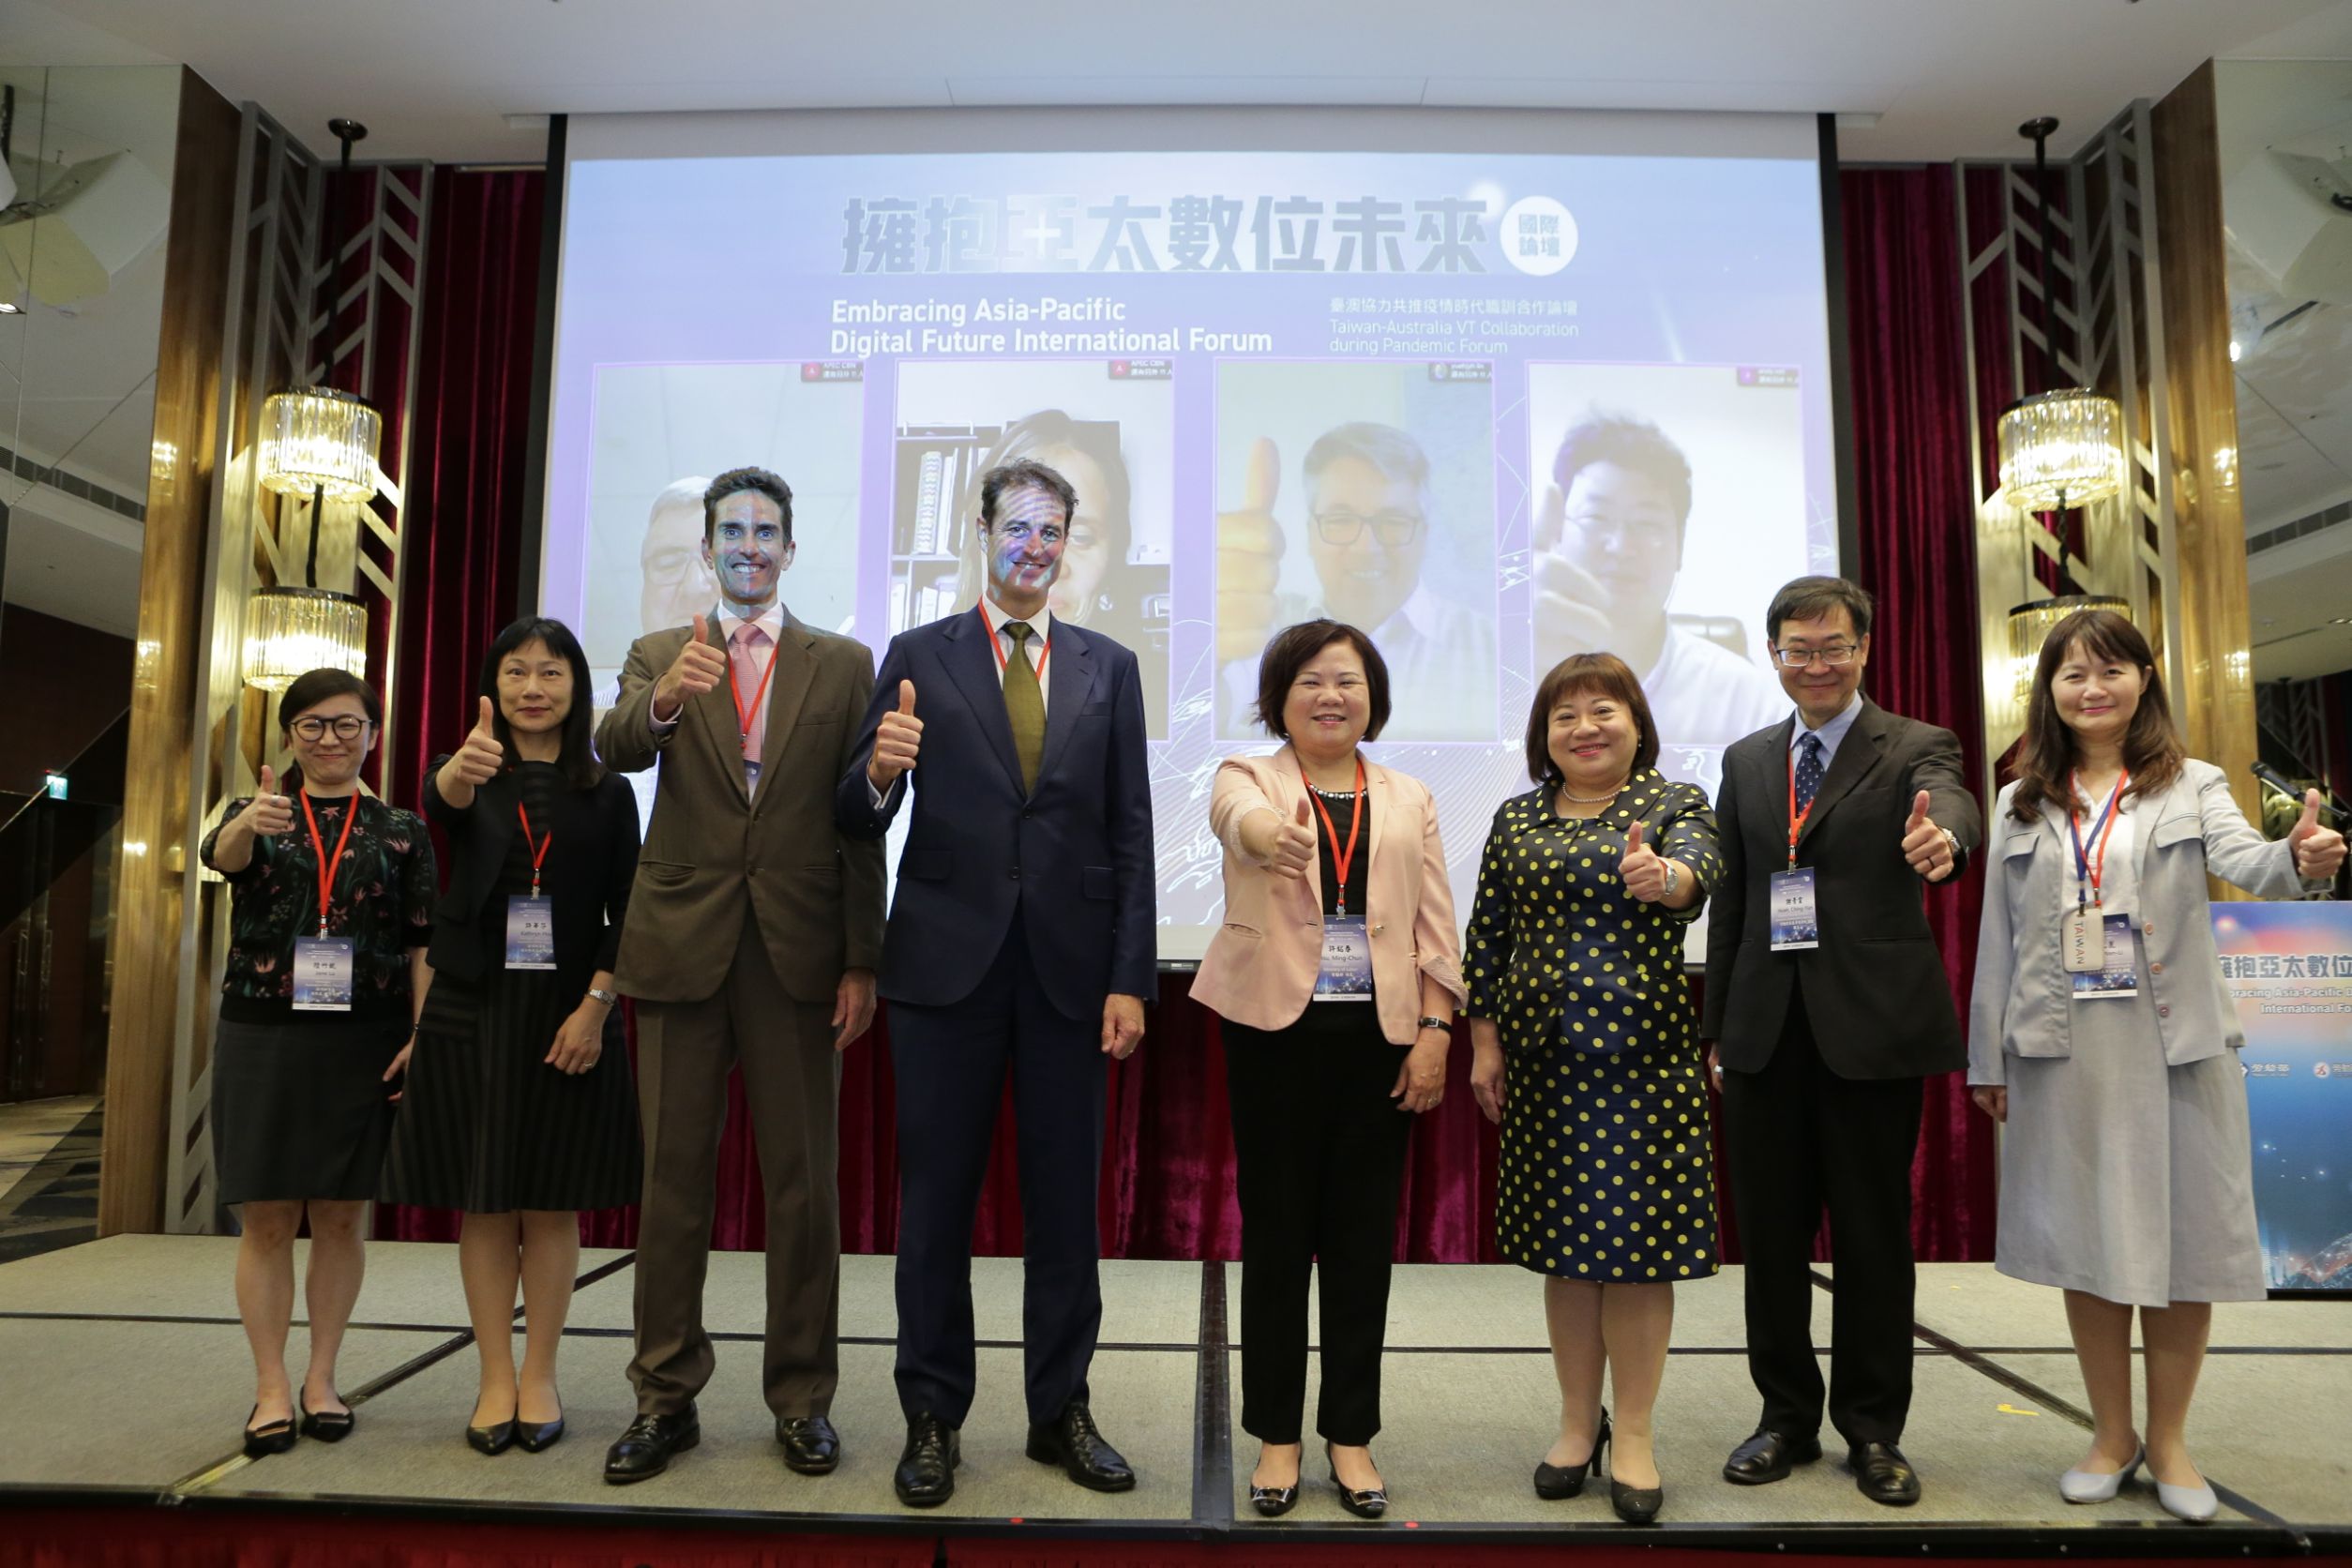 The Workforce Development Agency, Ministry of Labor Organized the Embracing Asia-Pacific Digital Future International Forum to Promote Quality Growth in the Asia-Pacific Region